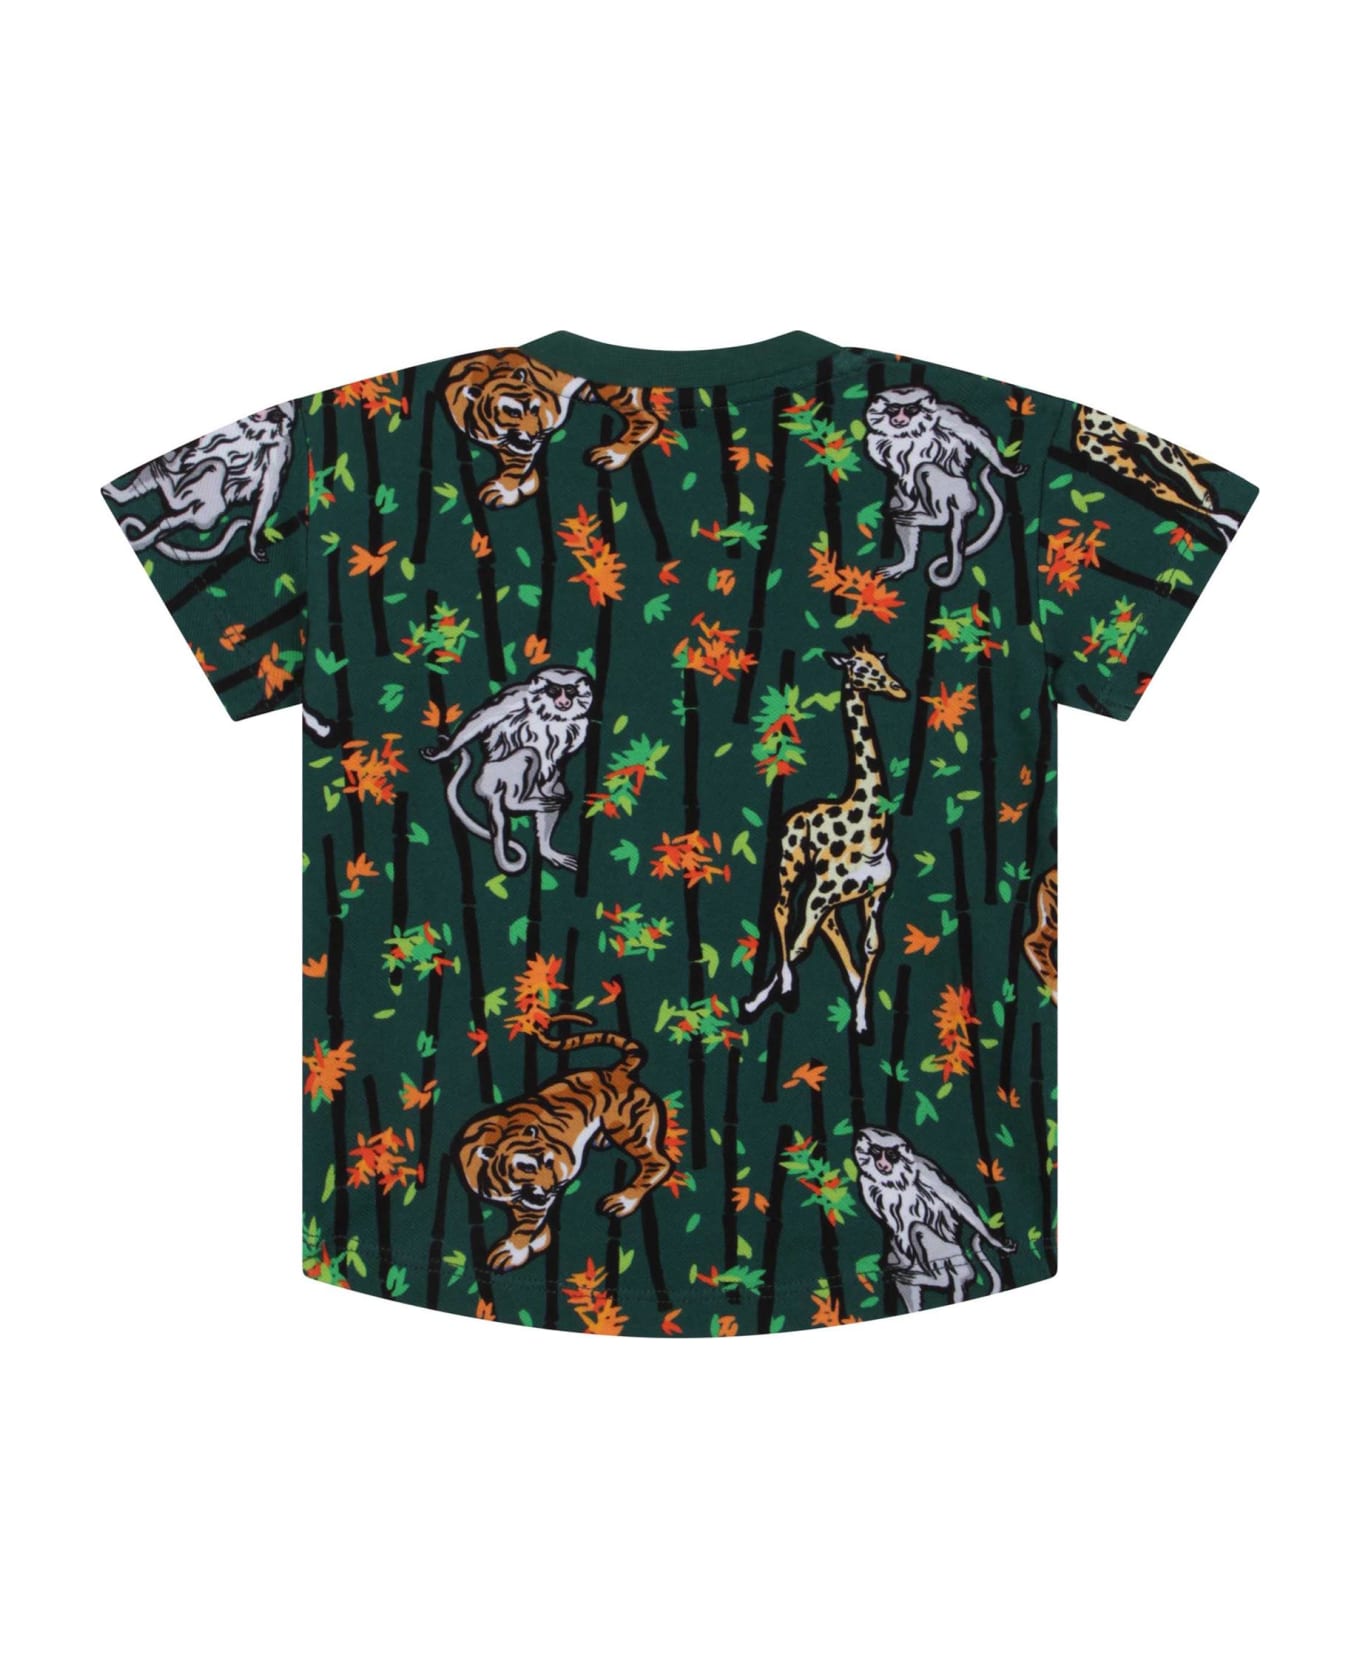 Kenzo Kids Green T-shirt With All-over Jungle Print - Green